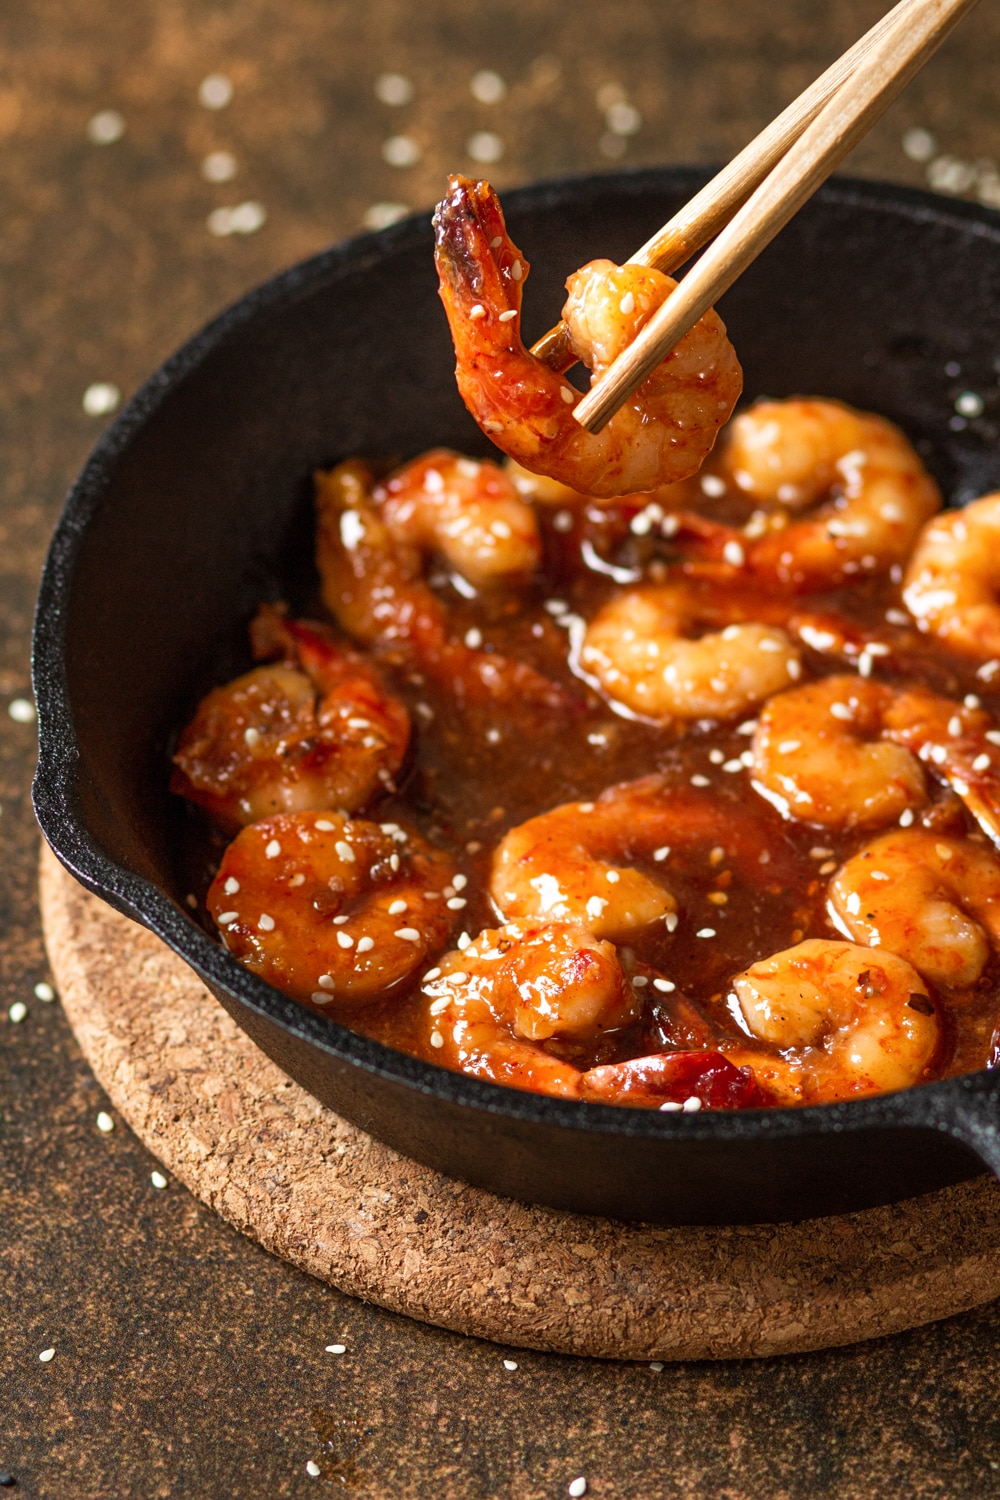 Several pieces of shrimp in a fire cracker sauce in a skillet. There is a piece of shrimp in between chopsticks being held above the skillet. The skillet is on a circular cork board on a brown counter.